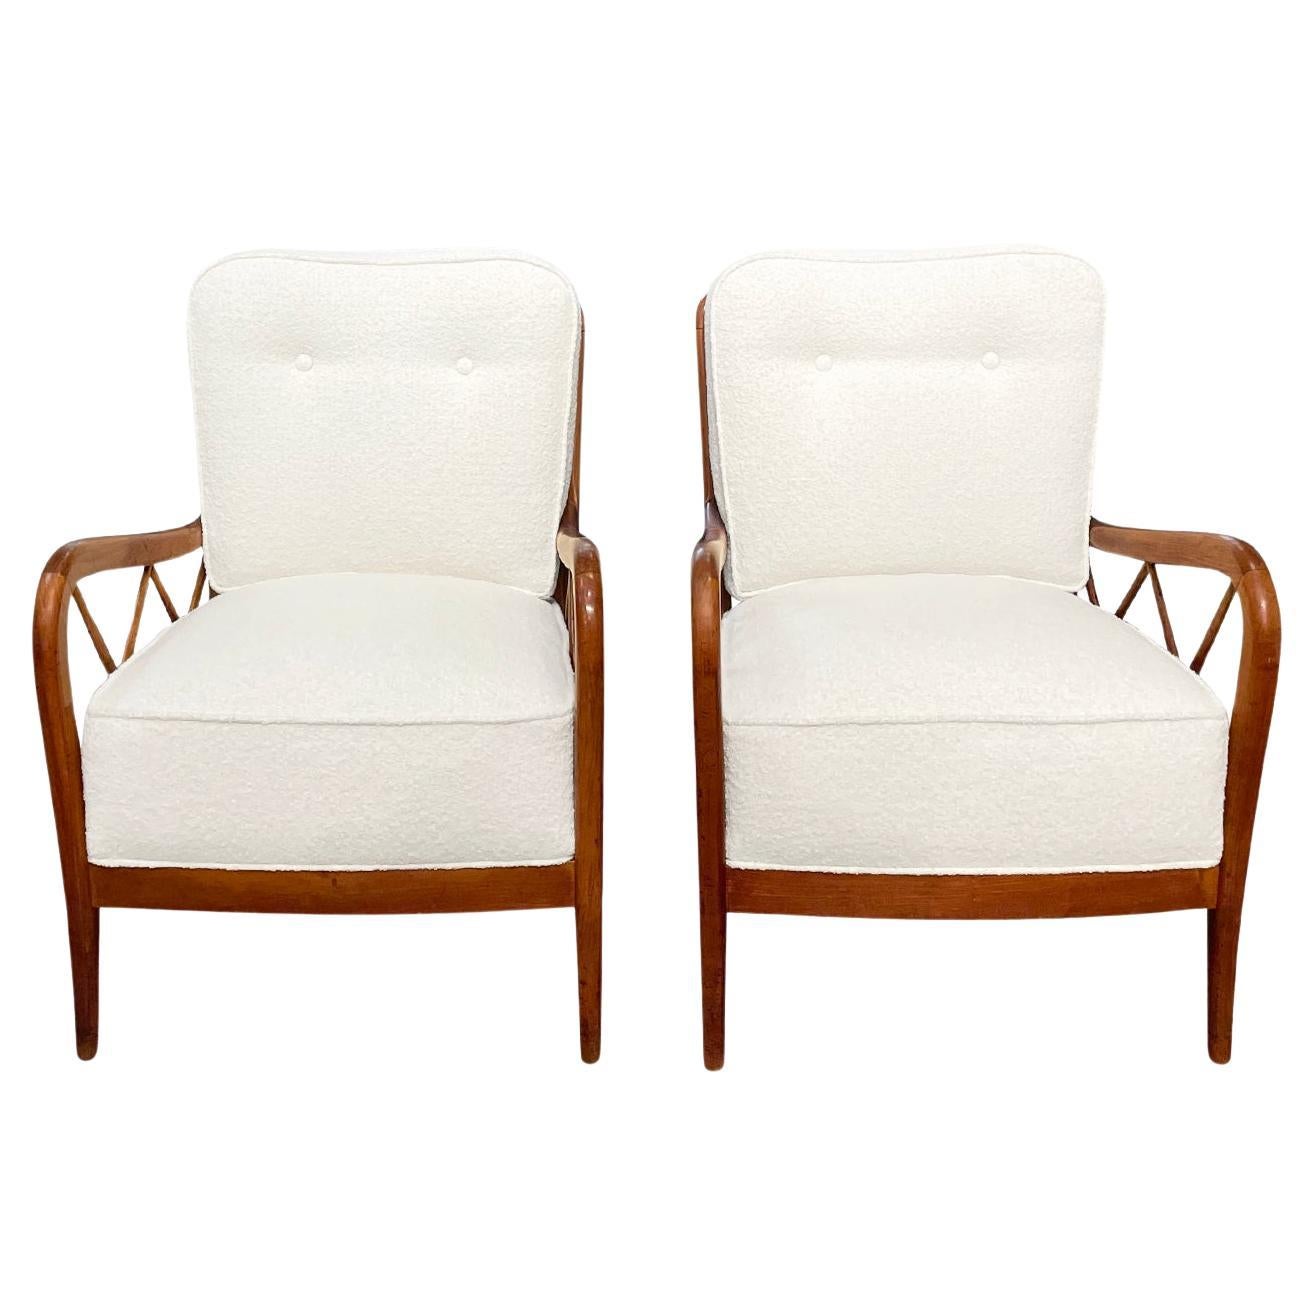 20th Century Italian Pair of Vintage Walnut Lounge Chairs by Paolo Buffa